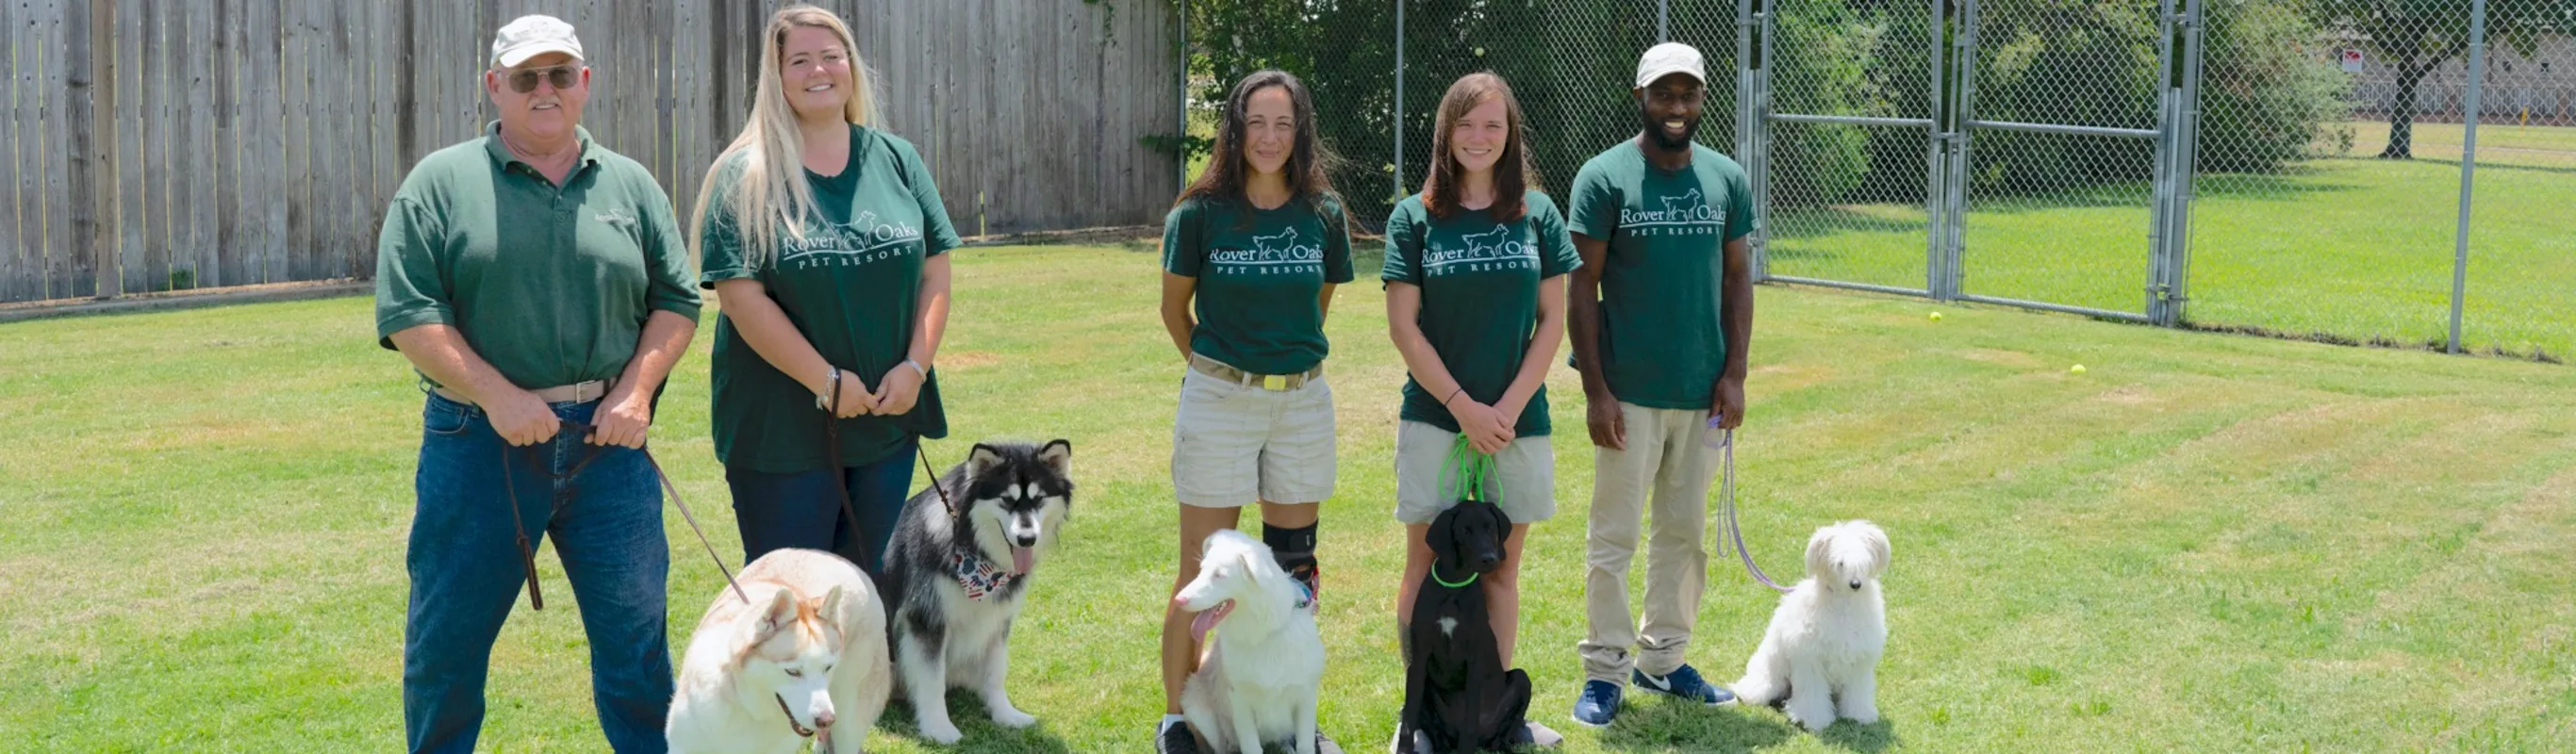 Our team at Rover Oaks Pet Resort